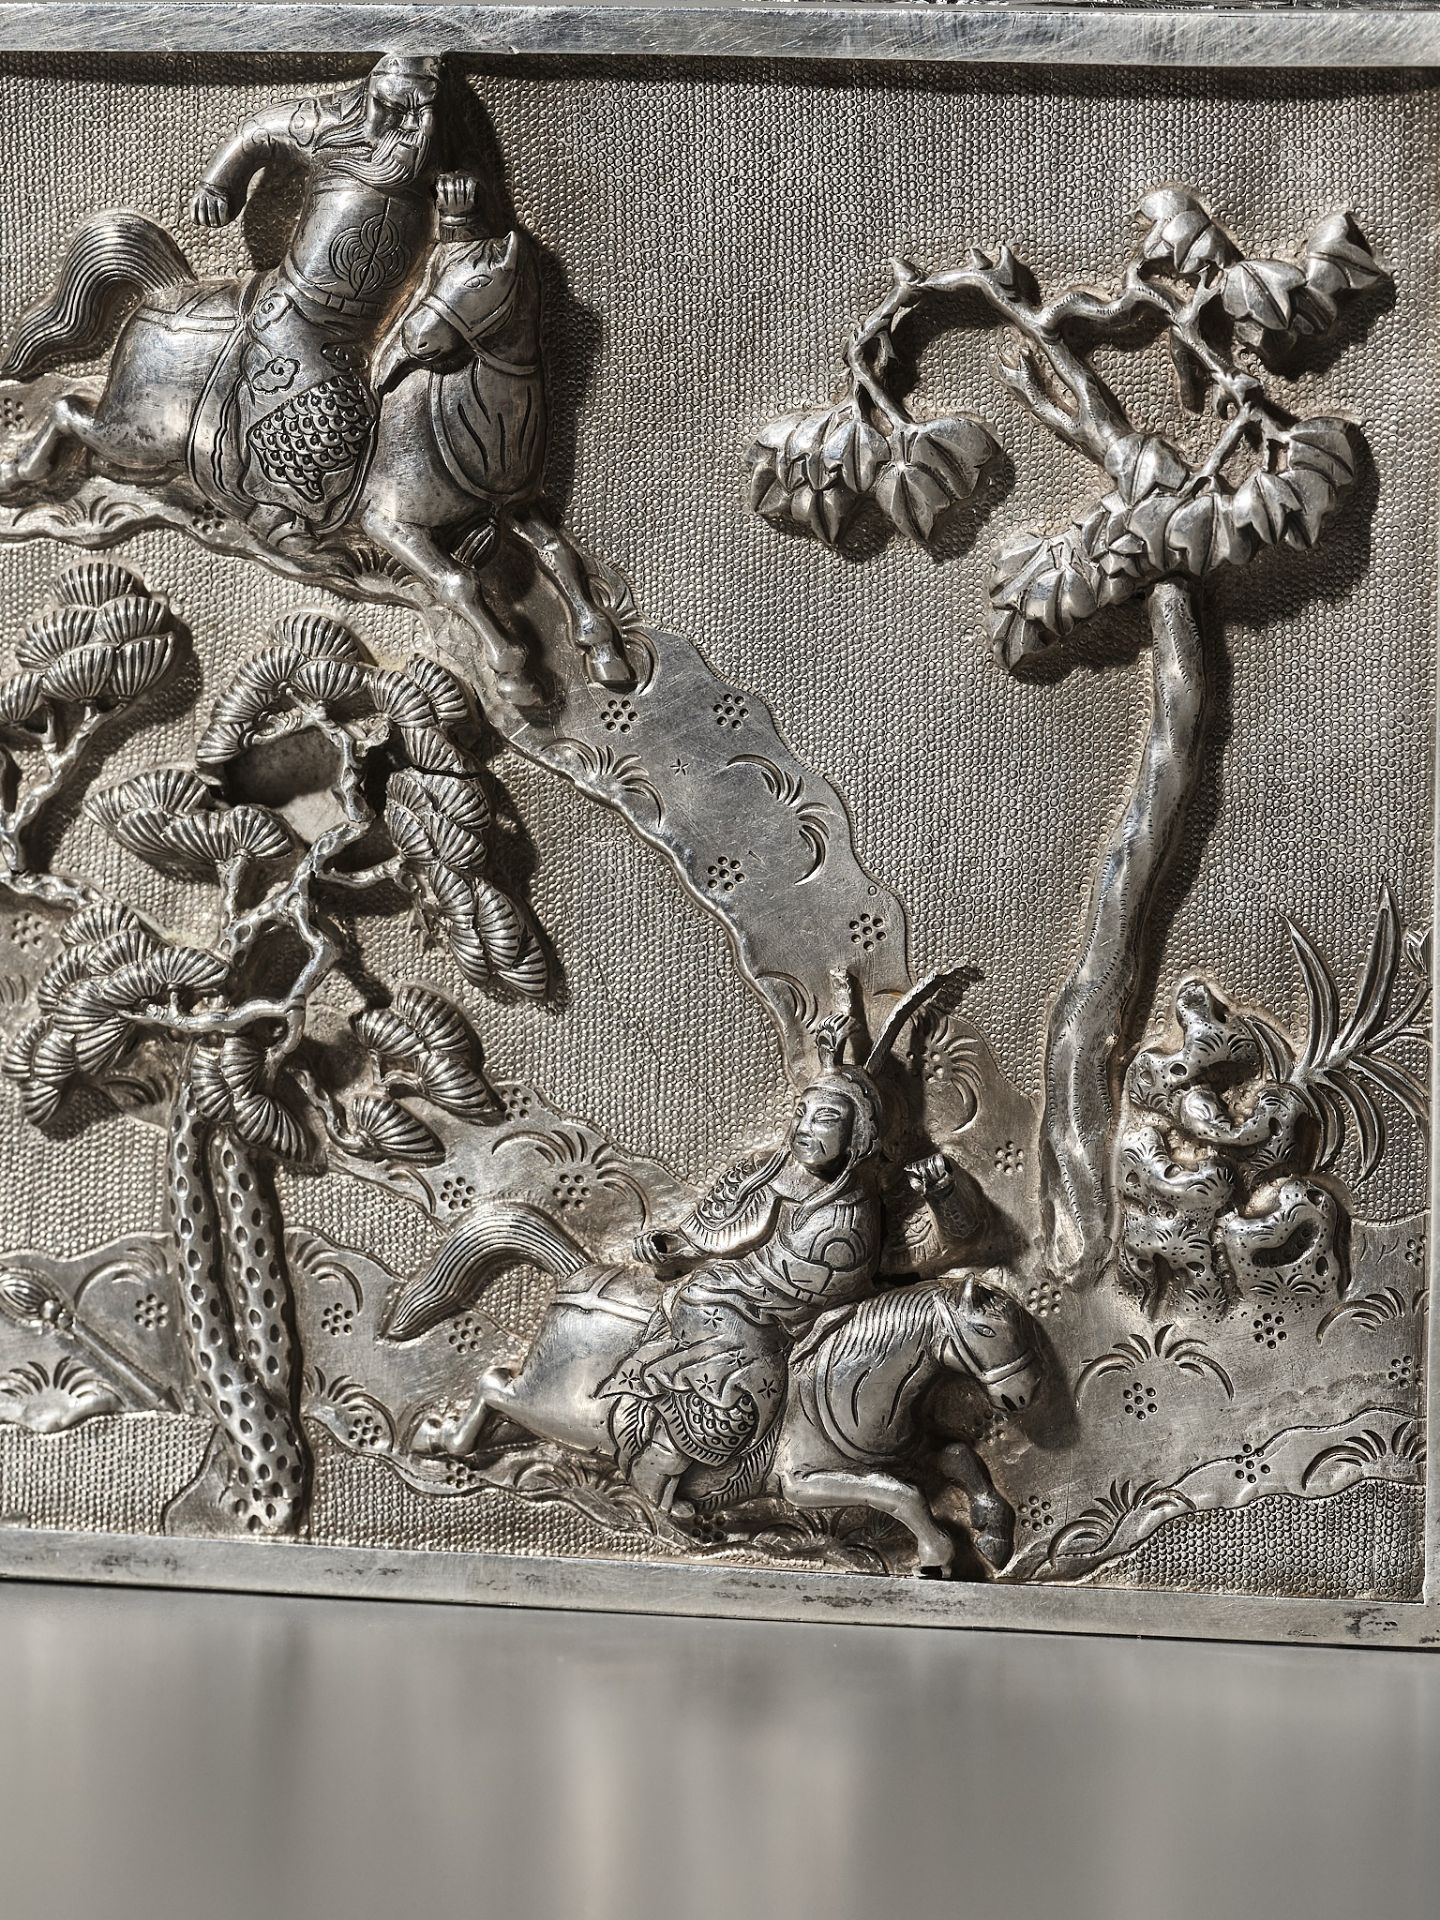 AN EXPORT SILVER REPOUSSE CIGAR BOX AND COVER, TONG YI MARK, LATE QING DYNASTY - Image 10 of 22